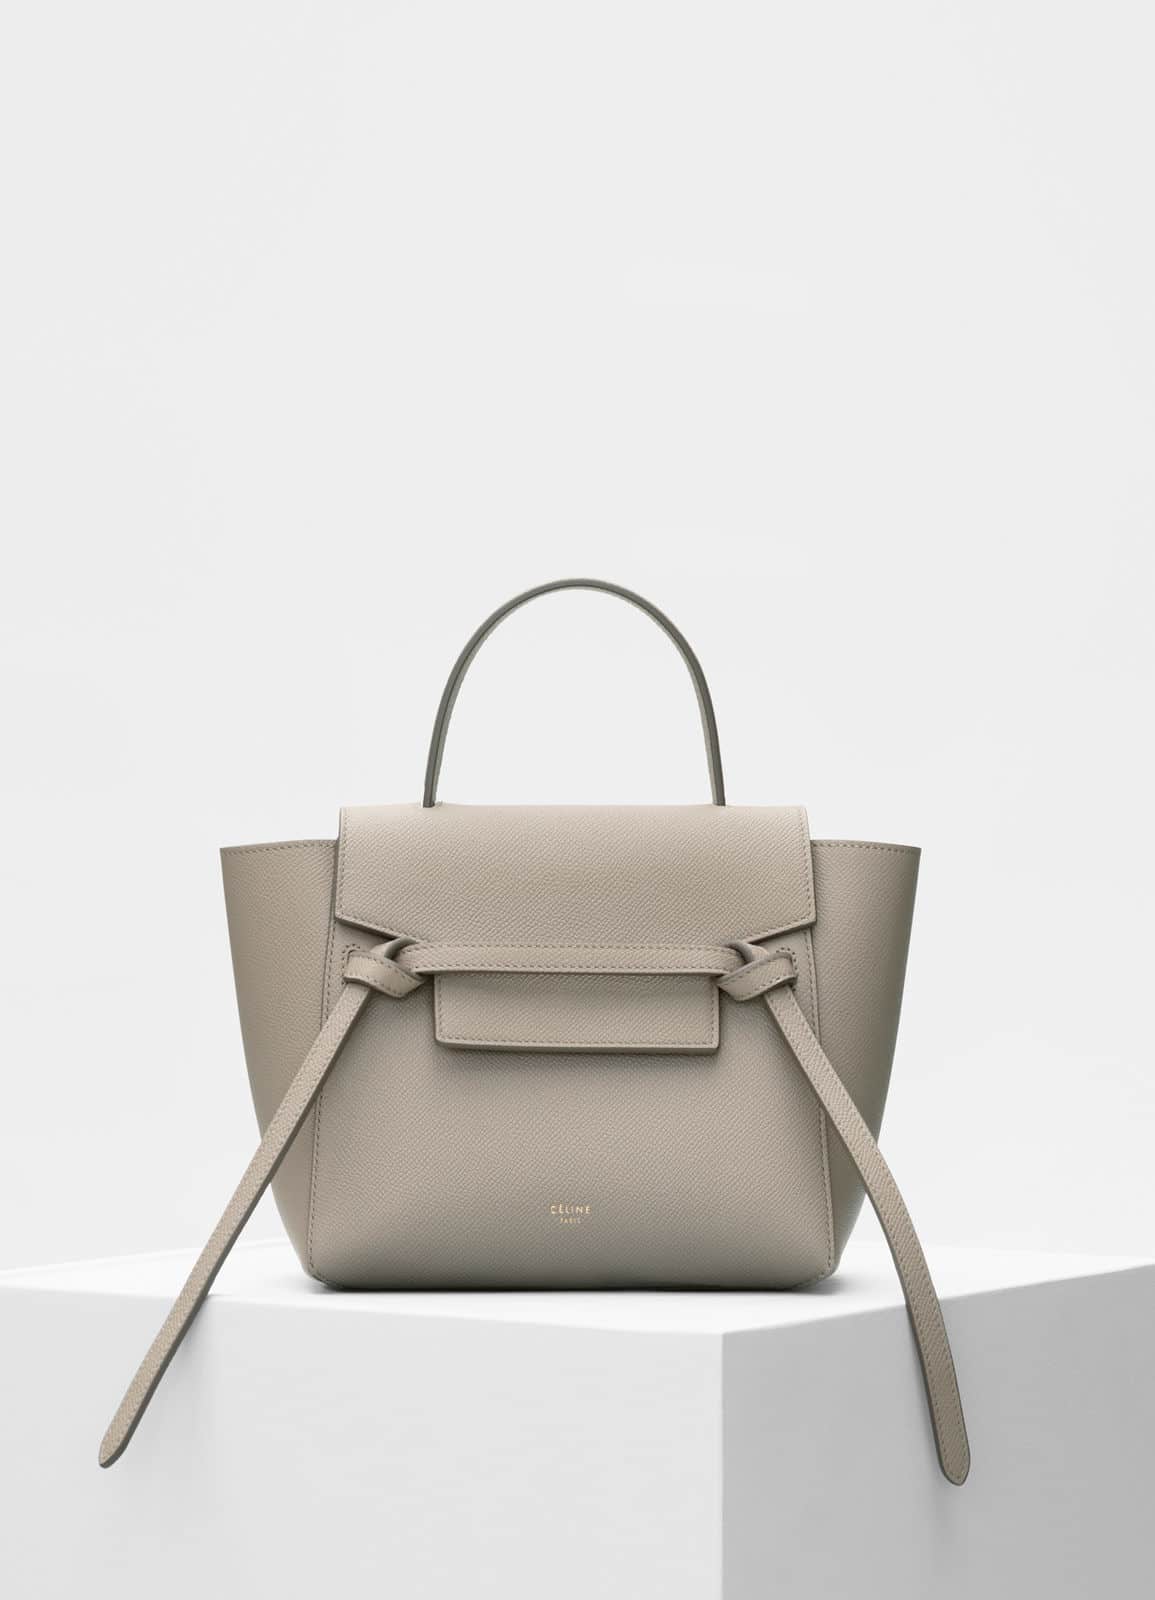 Celine Fall 2018 Bag Collection Featuring The Made in Tote Bags ...